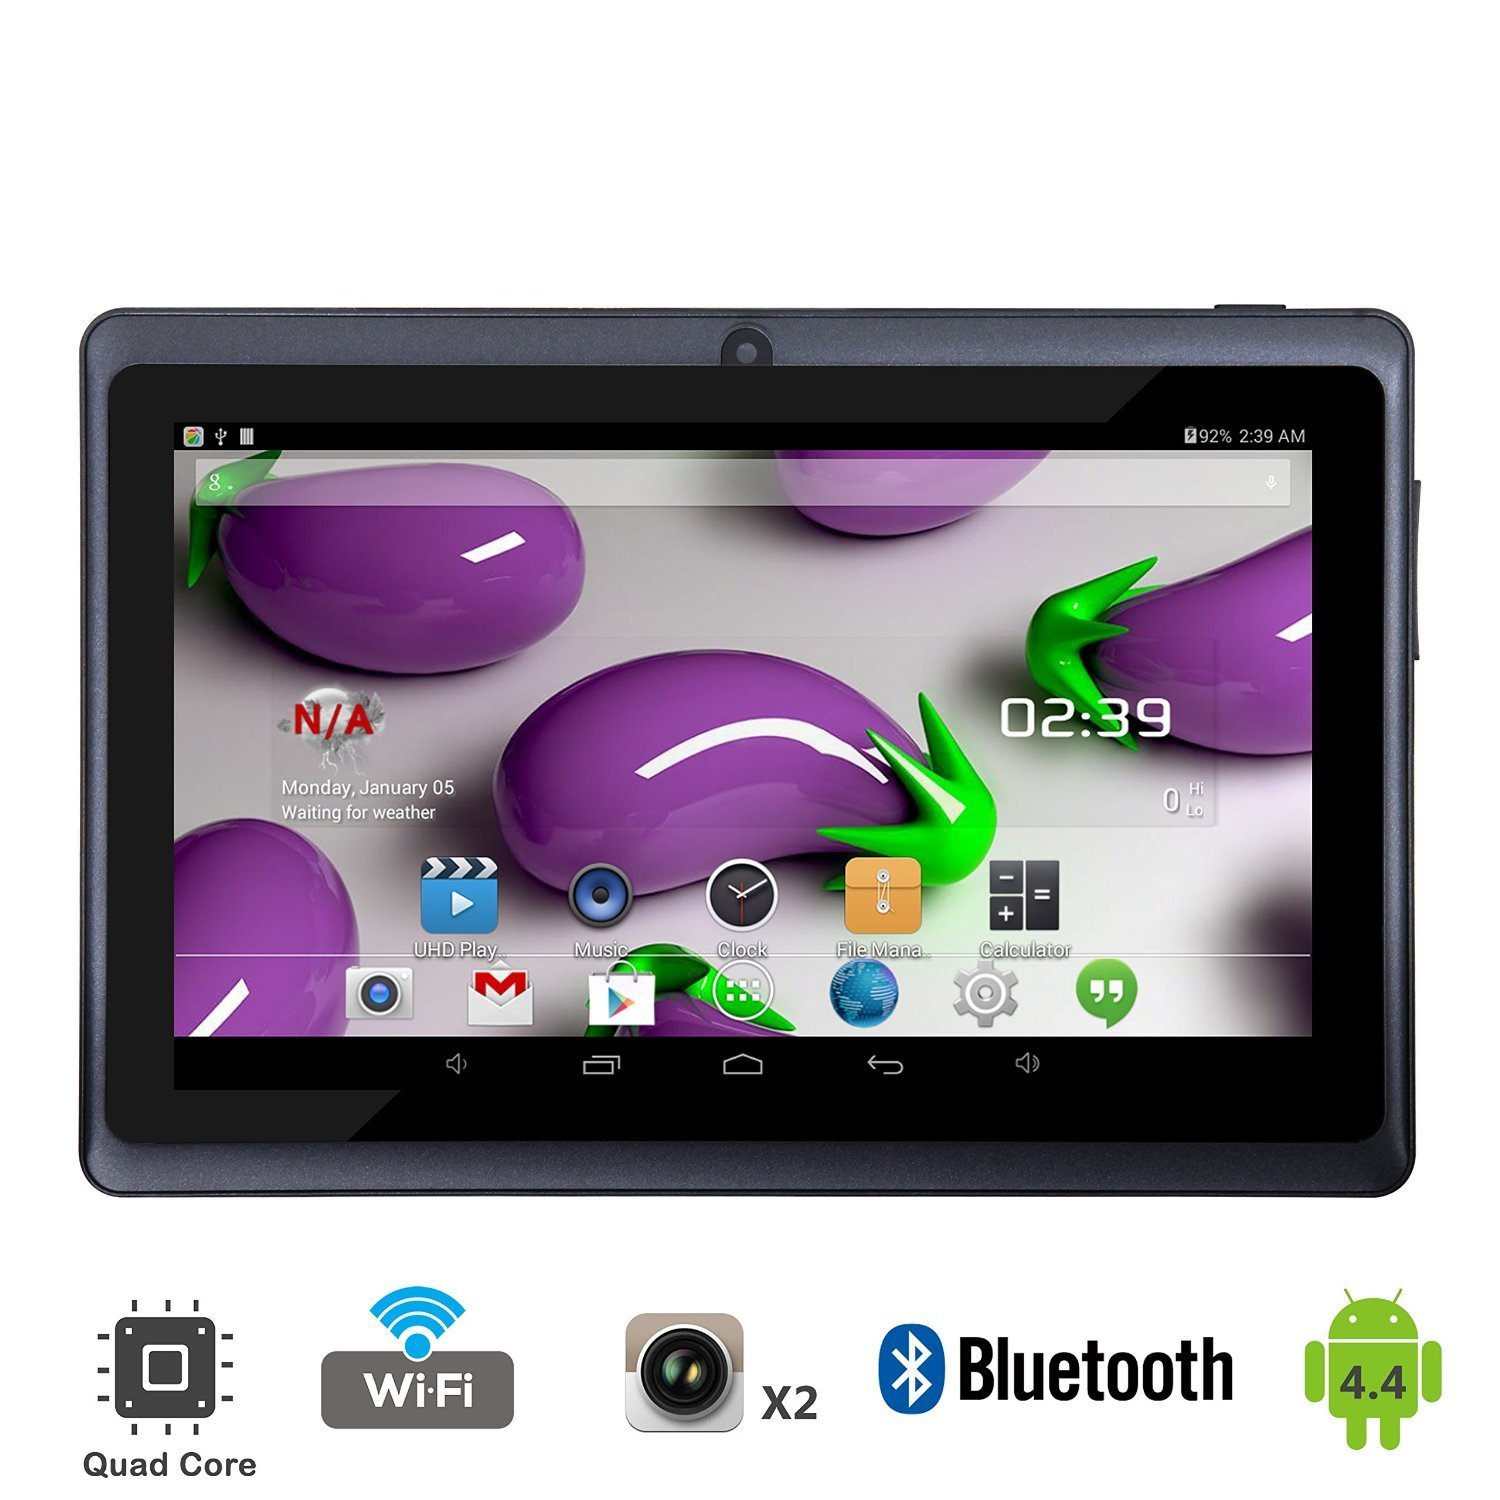 Tagital T7X 7" Quad Core Android Tablet PC Bundled with Keyboard Case - image 5 of 8